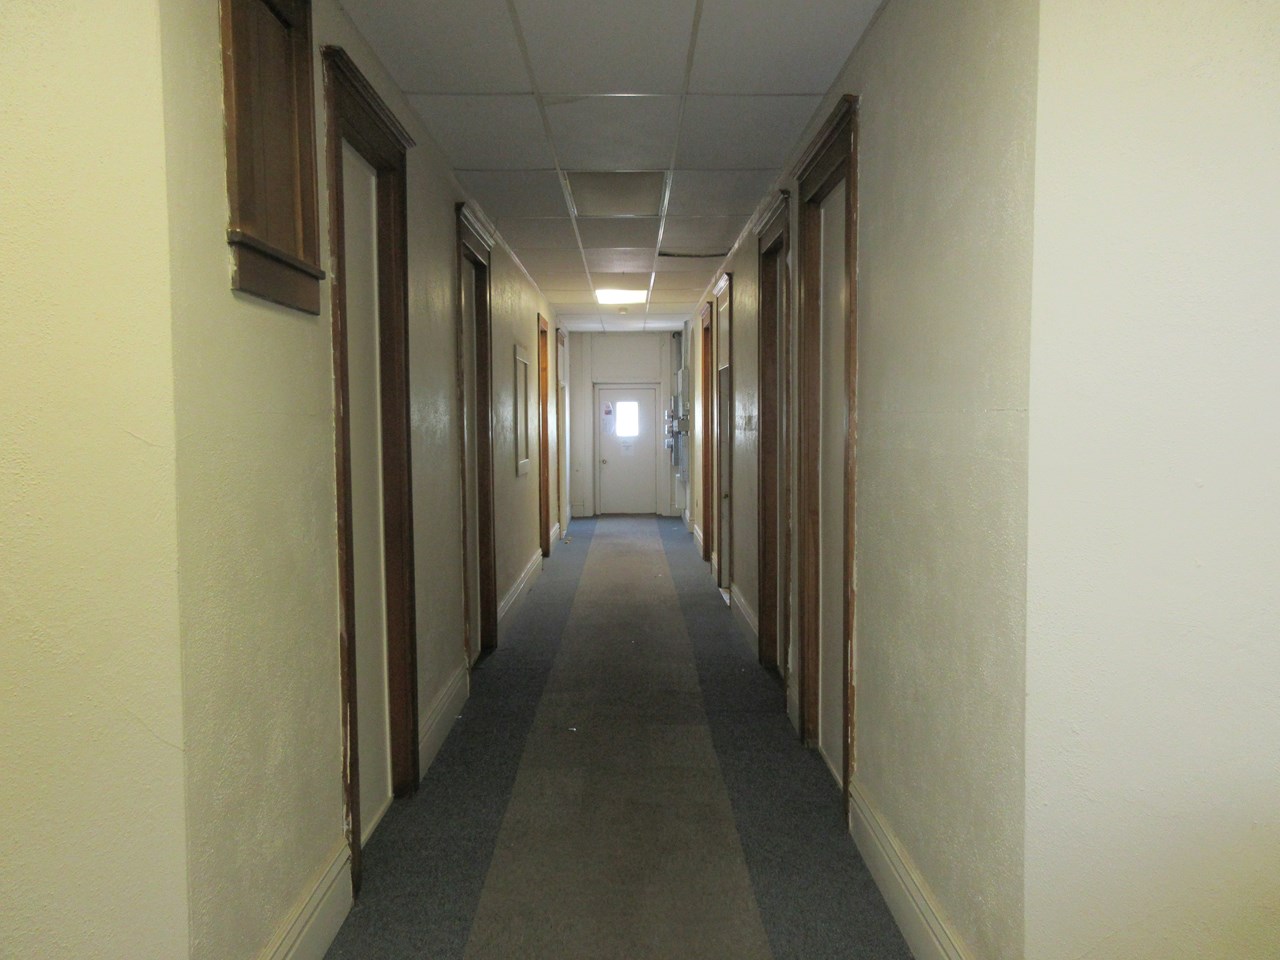 hallway to apartments 3 and 4